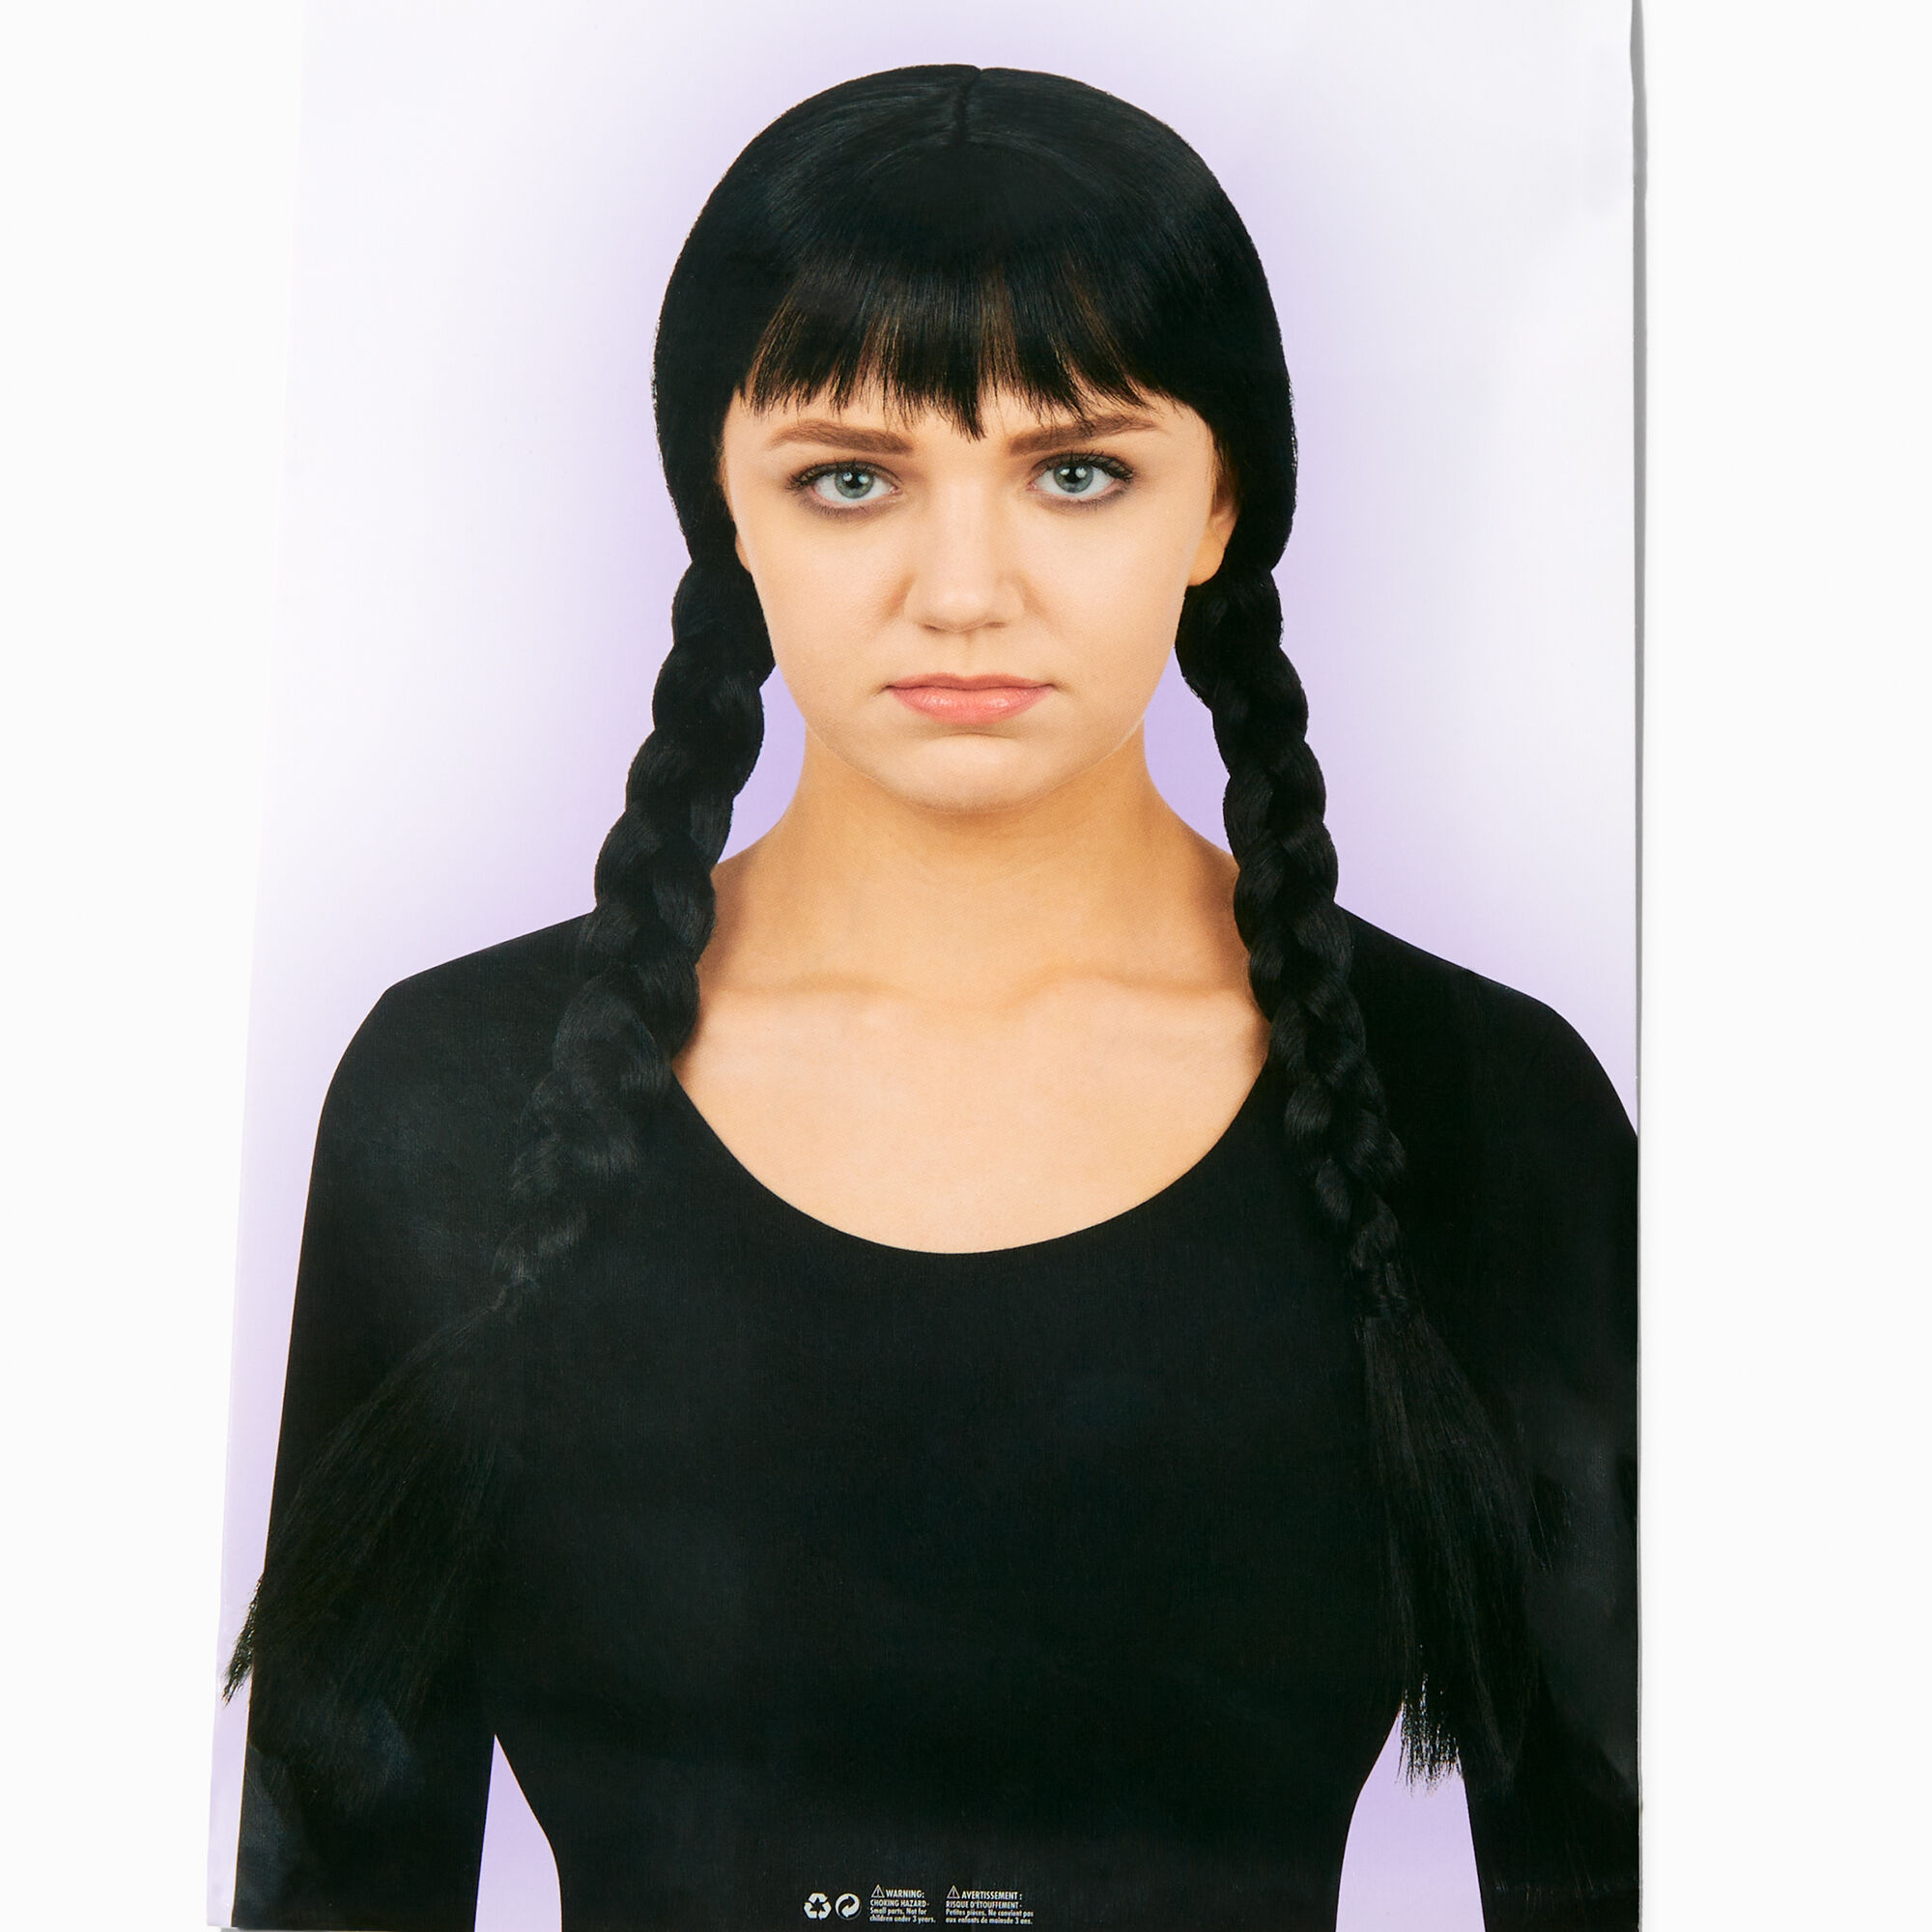 View Claires Braided Pigtails Wig Black information